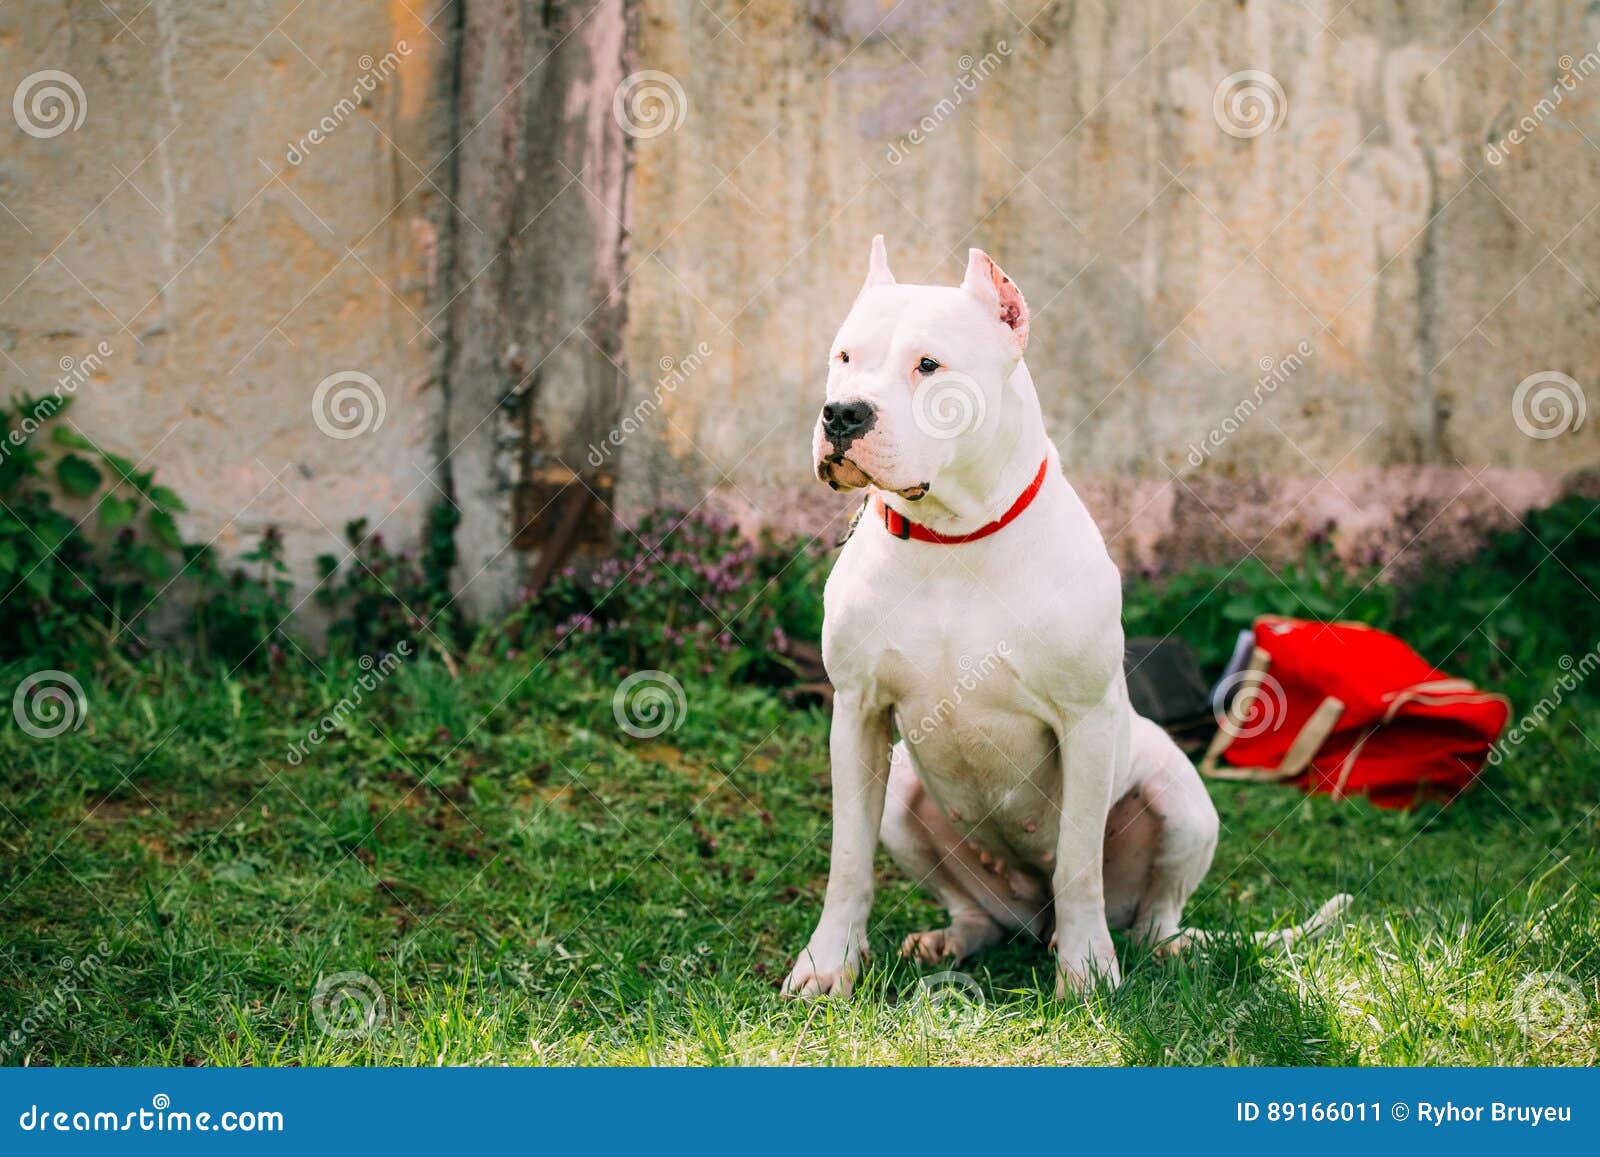 https://thumbs.dreamstime.com/z/white-dog-dogo-argentino-also-known-as-argentine-mastiff-large-muscular-was-developed-argentina-89166011.jpg